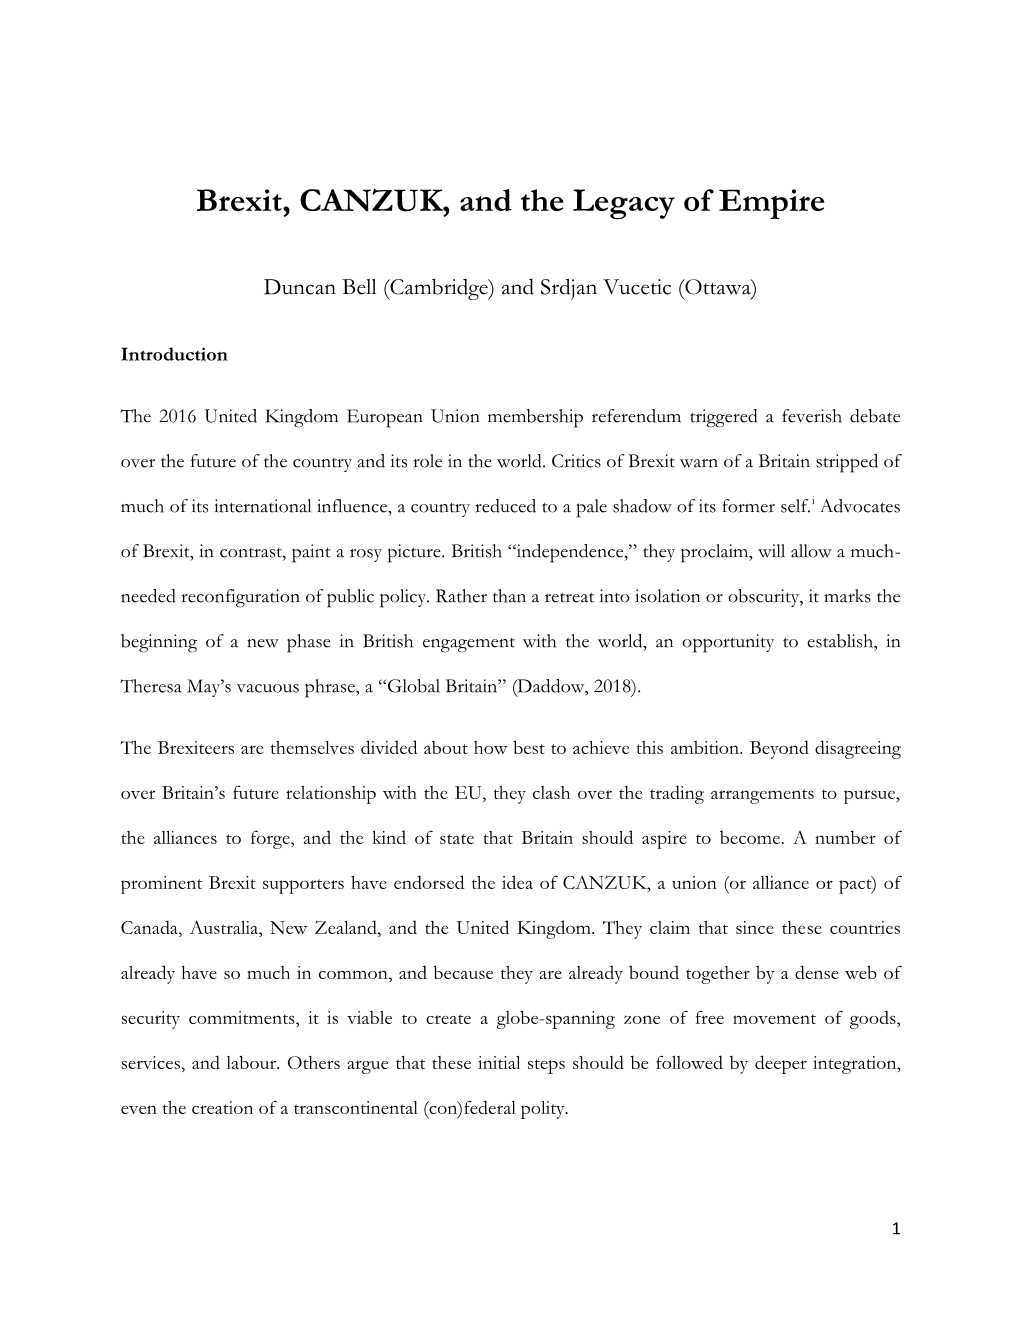 Brexit, CANZUK, and the Legacy of Empire